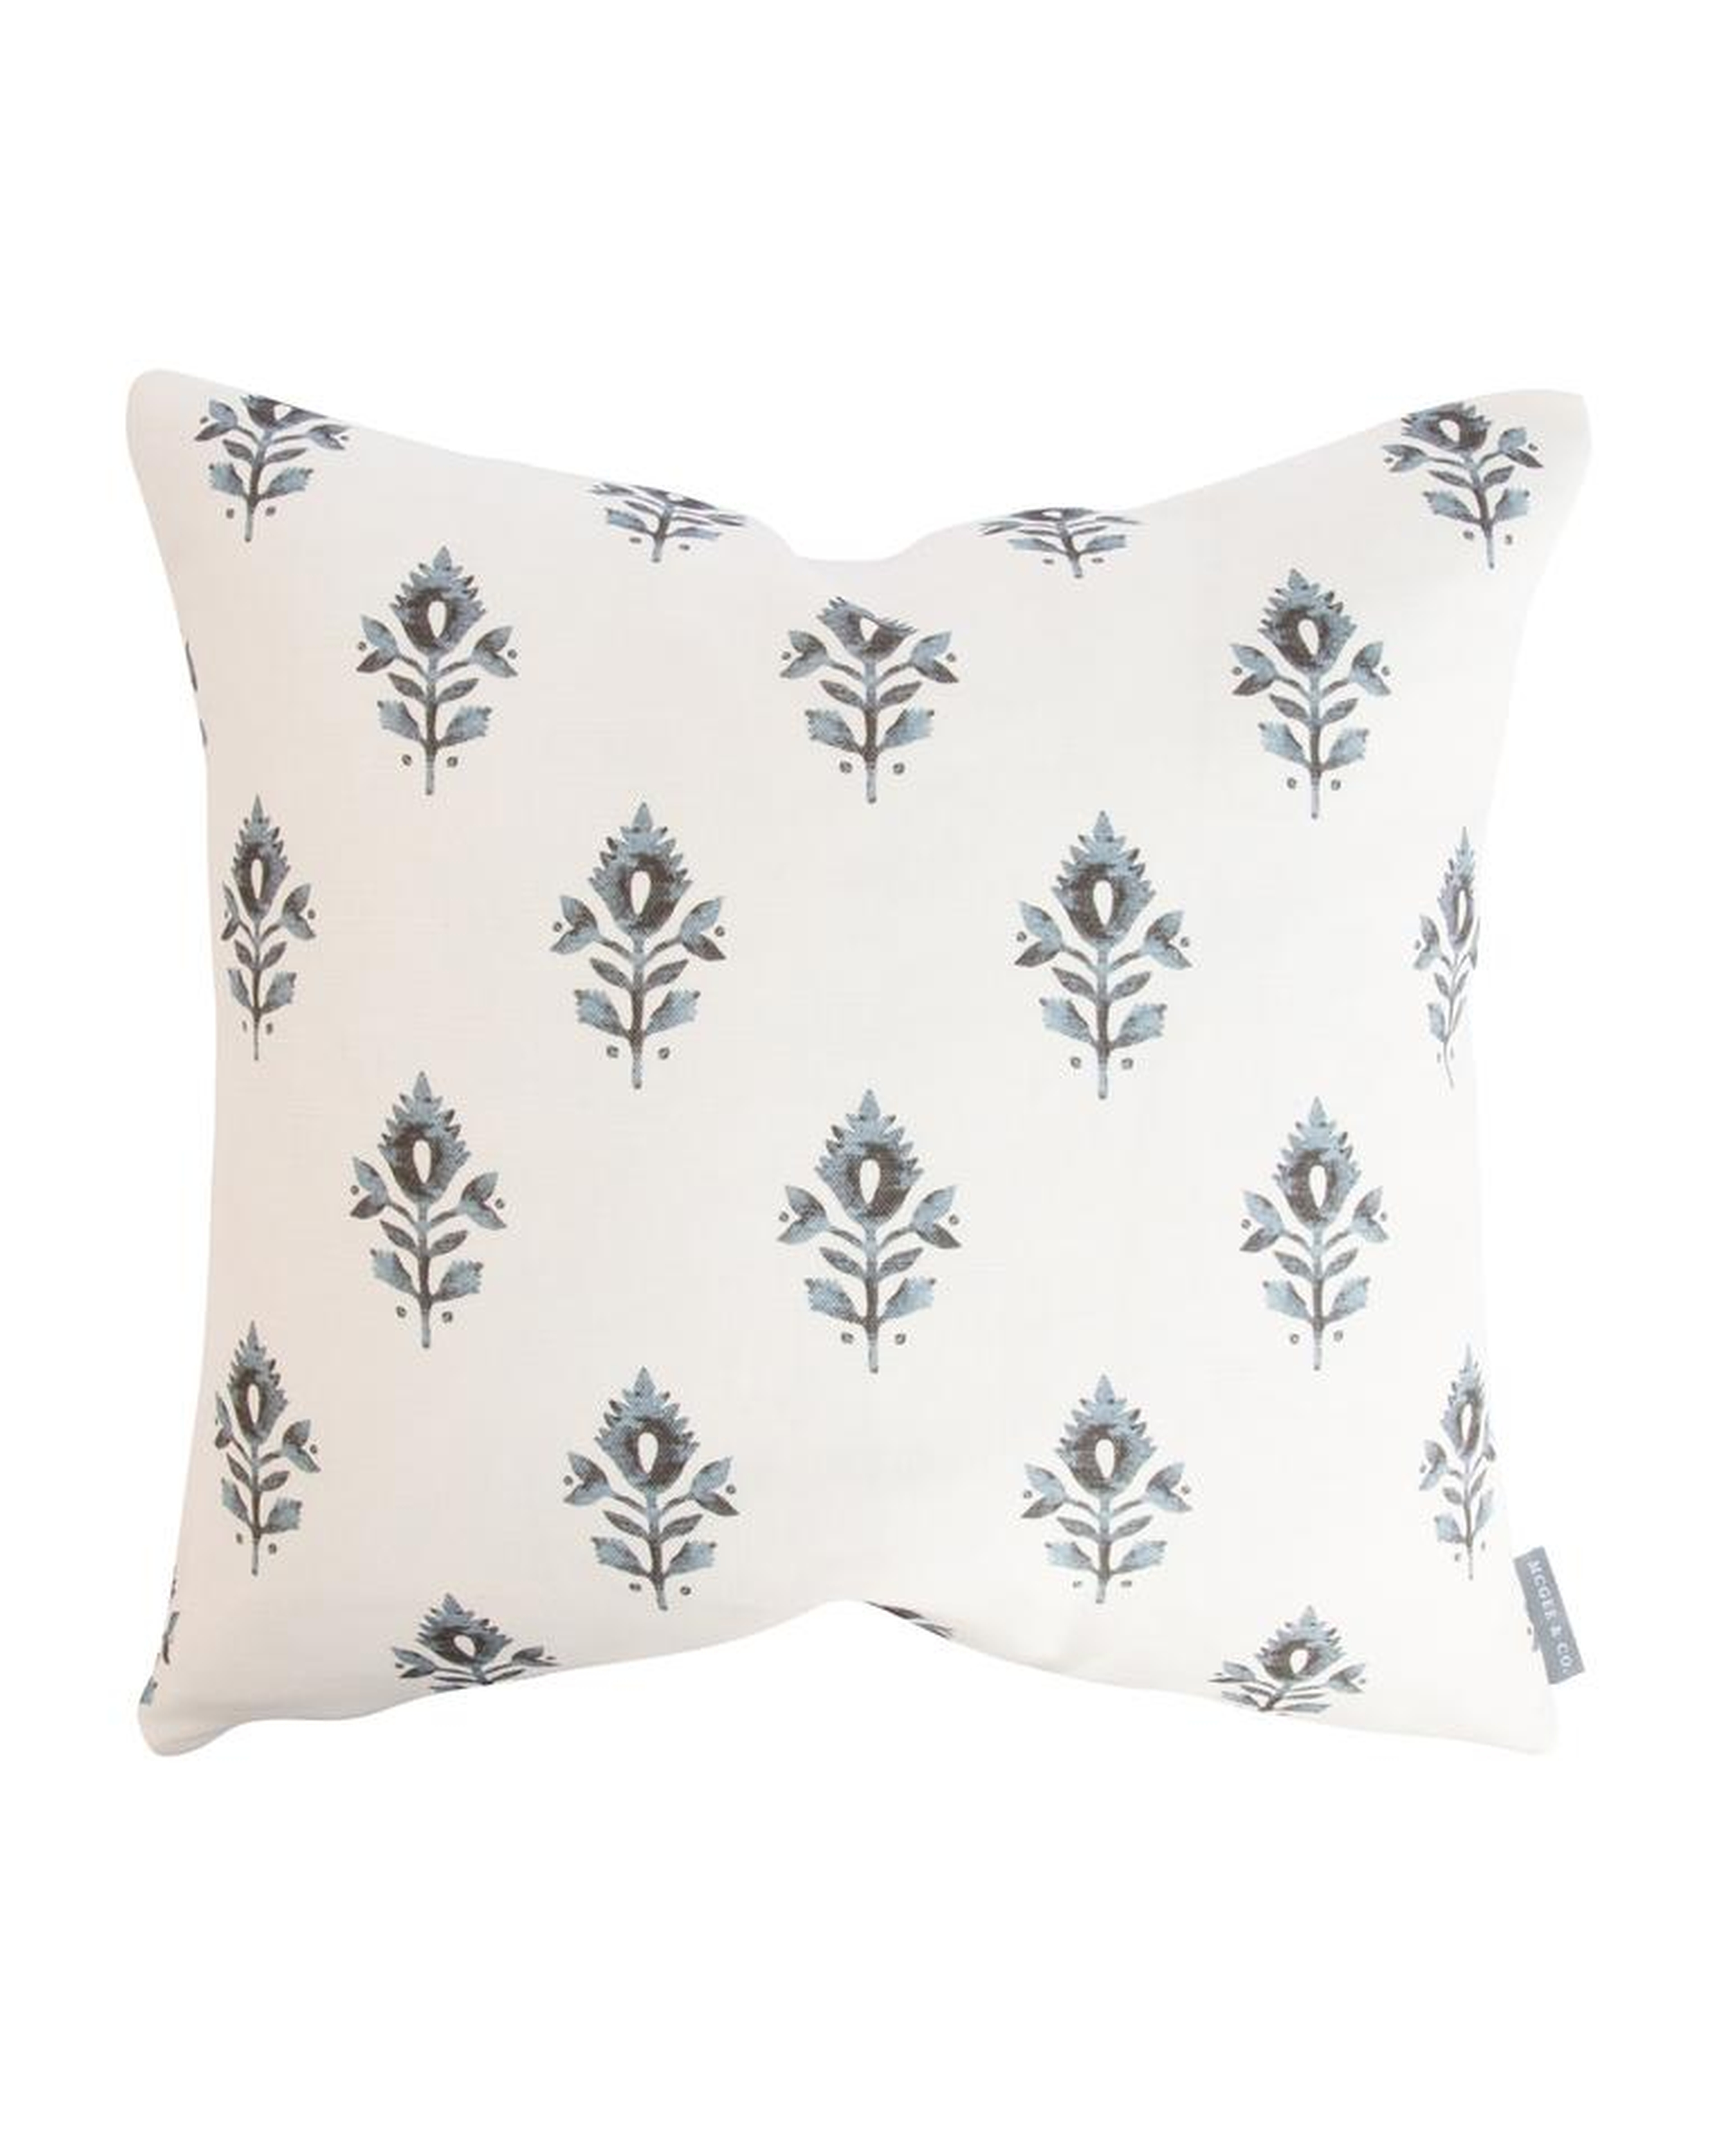 ADDISON BLOCK PRINT PILLOW WITHOUT INSERT, 20" x 20" - McGee & Co.